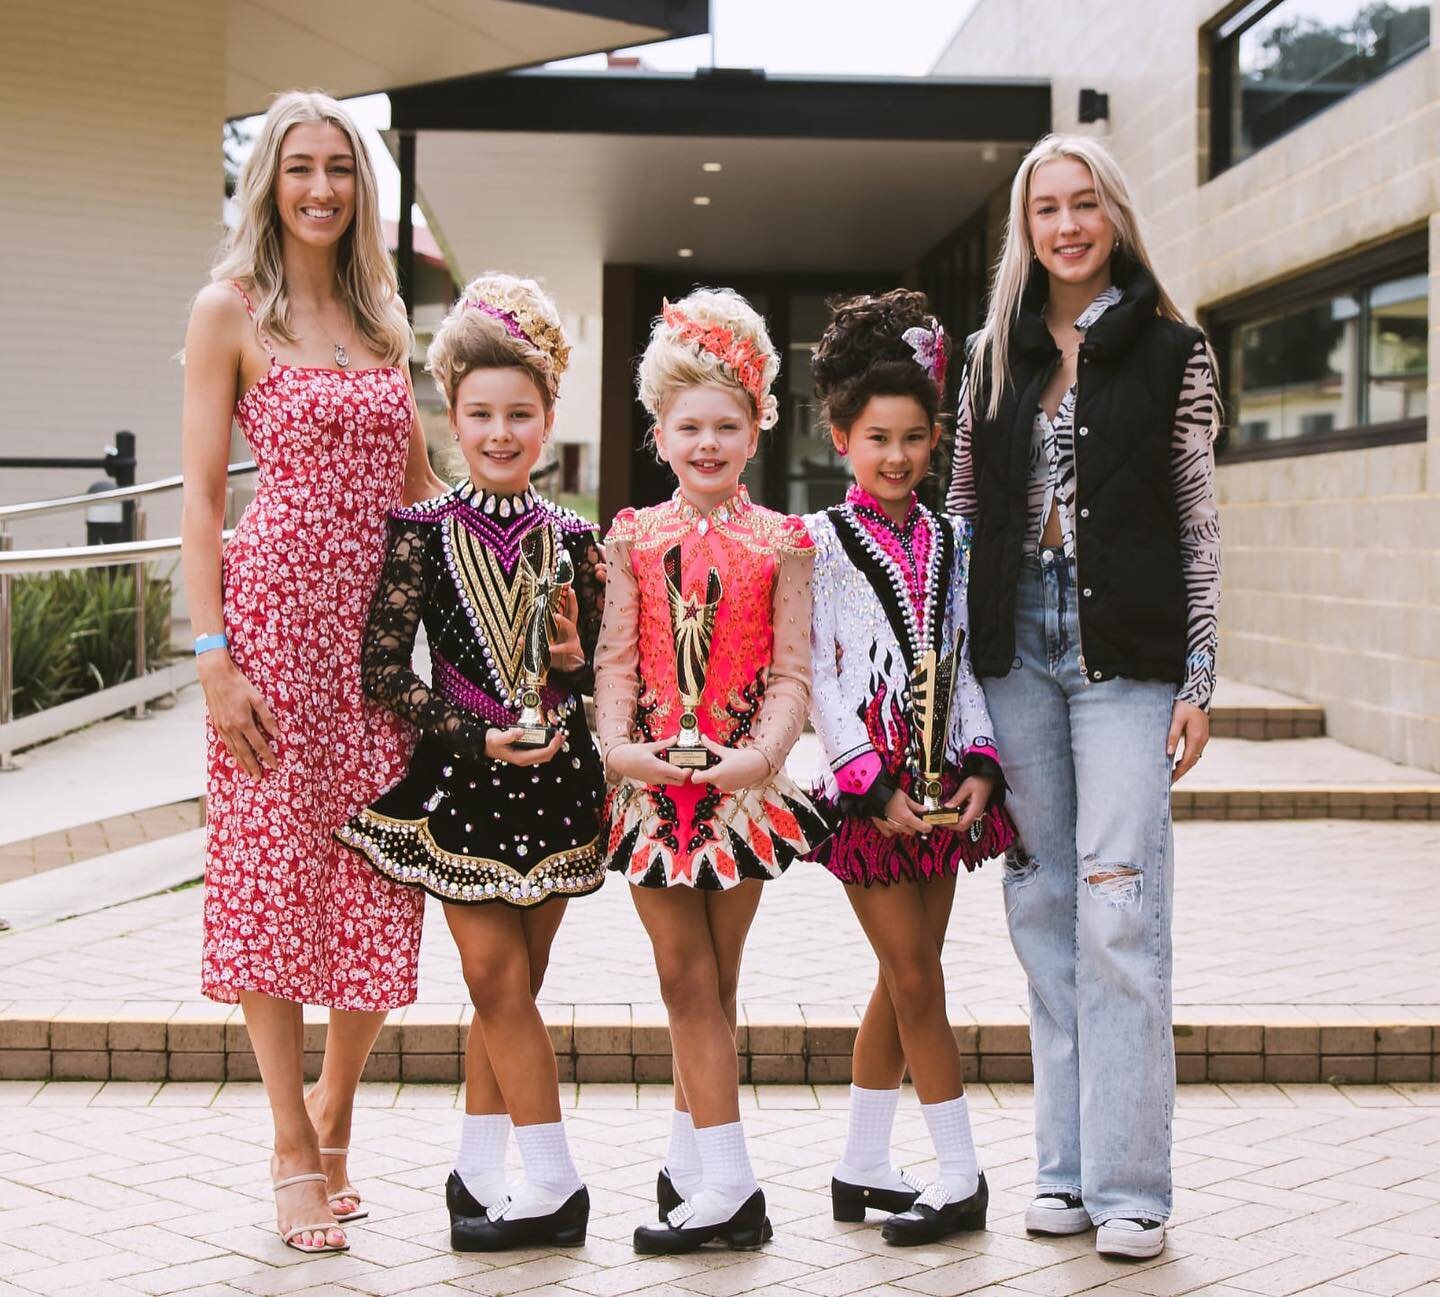 ✨ WA STATE CHAMPIONSHIPS ✨

Massive congratulations to our amazing 8 Years Girls who danced in their first ever State Championships!

🏅6th Place - Elsie Sproull
🏅7th Place - Ruby Cullen
🏅13th Place - Elliotte-Jade Staples